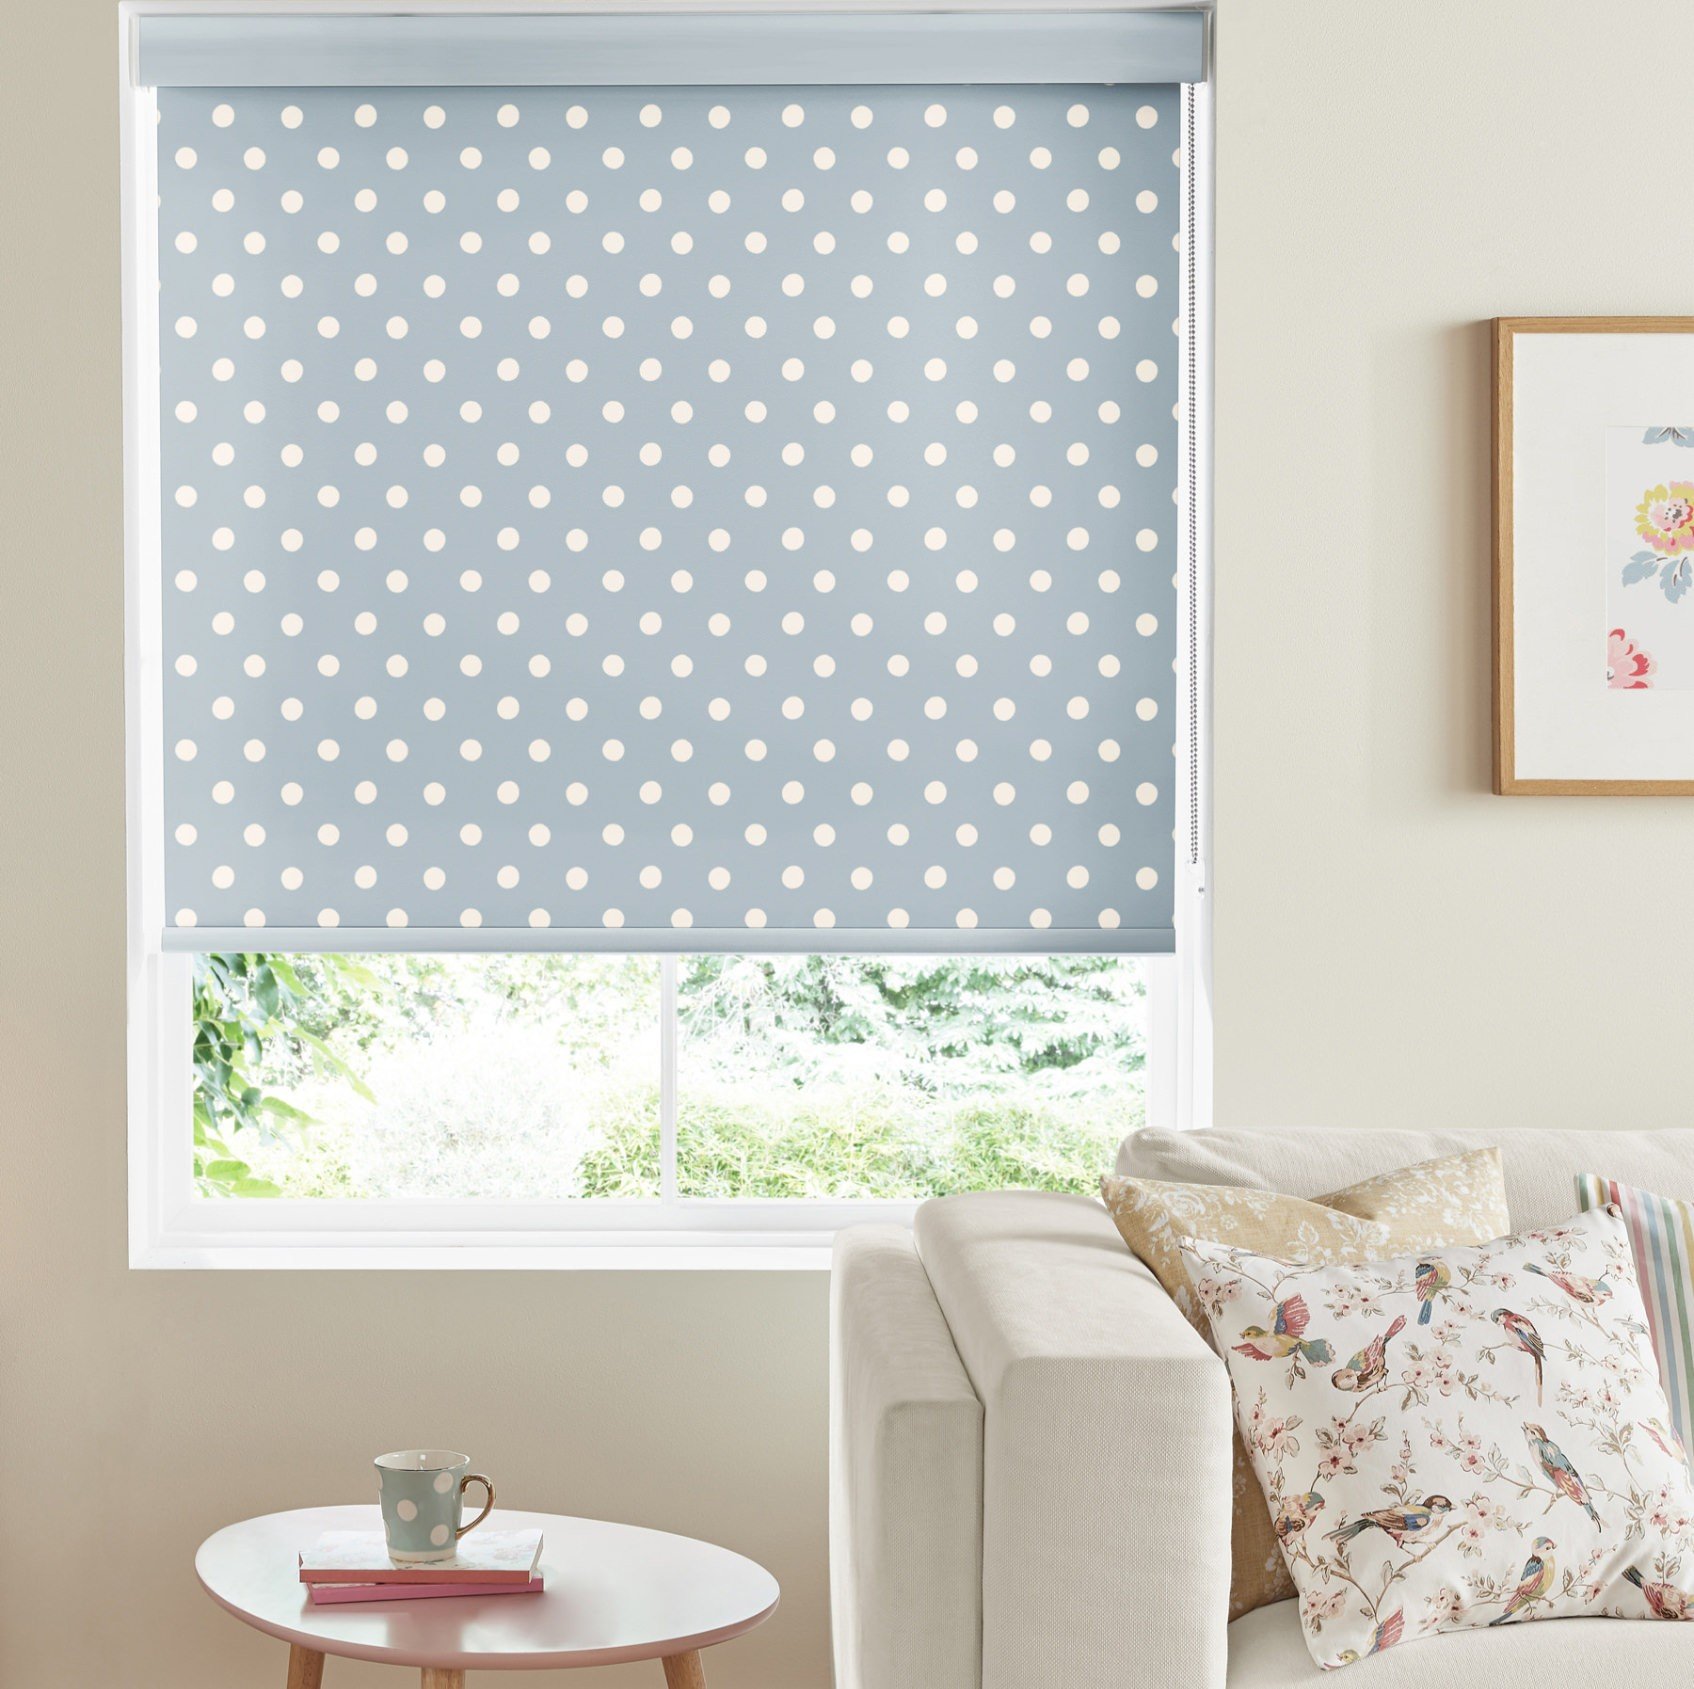 Cath Kidston Button Spot Blue Dimout Roller Blind